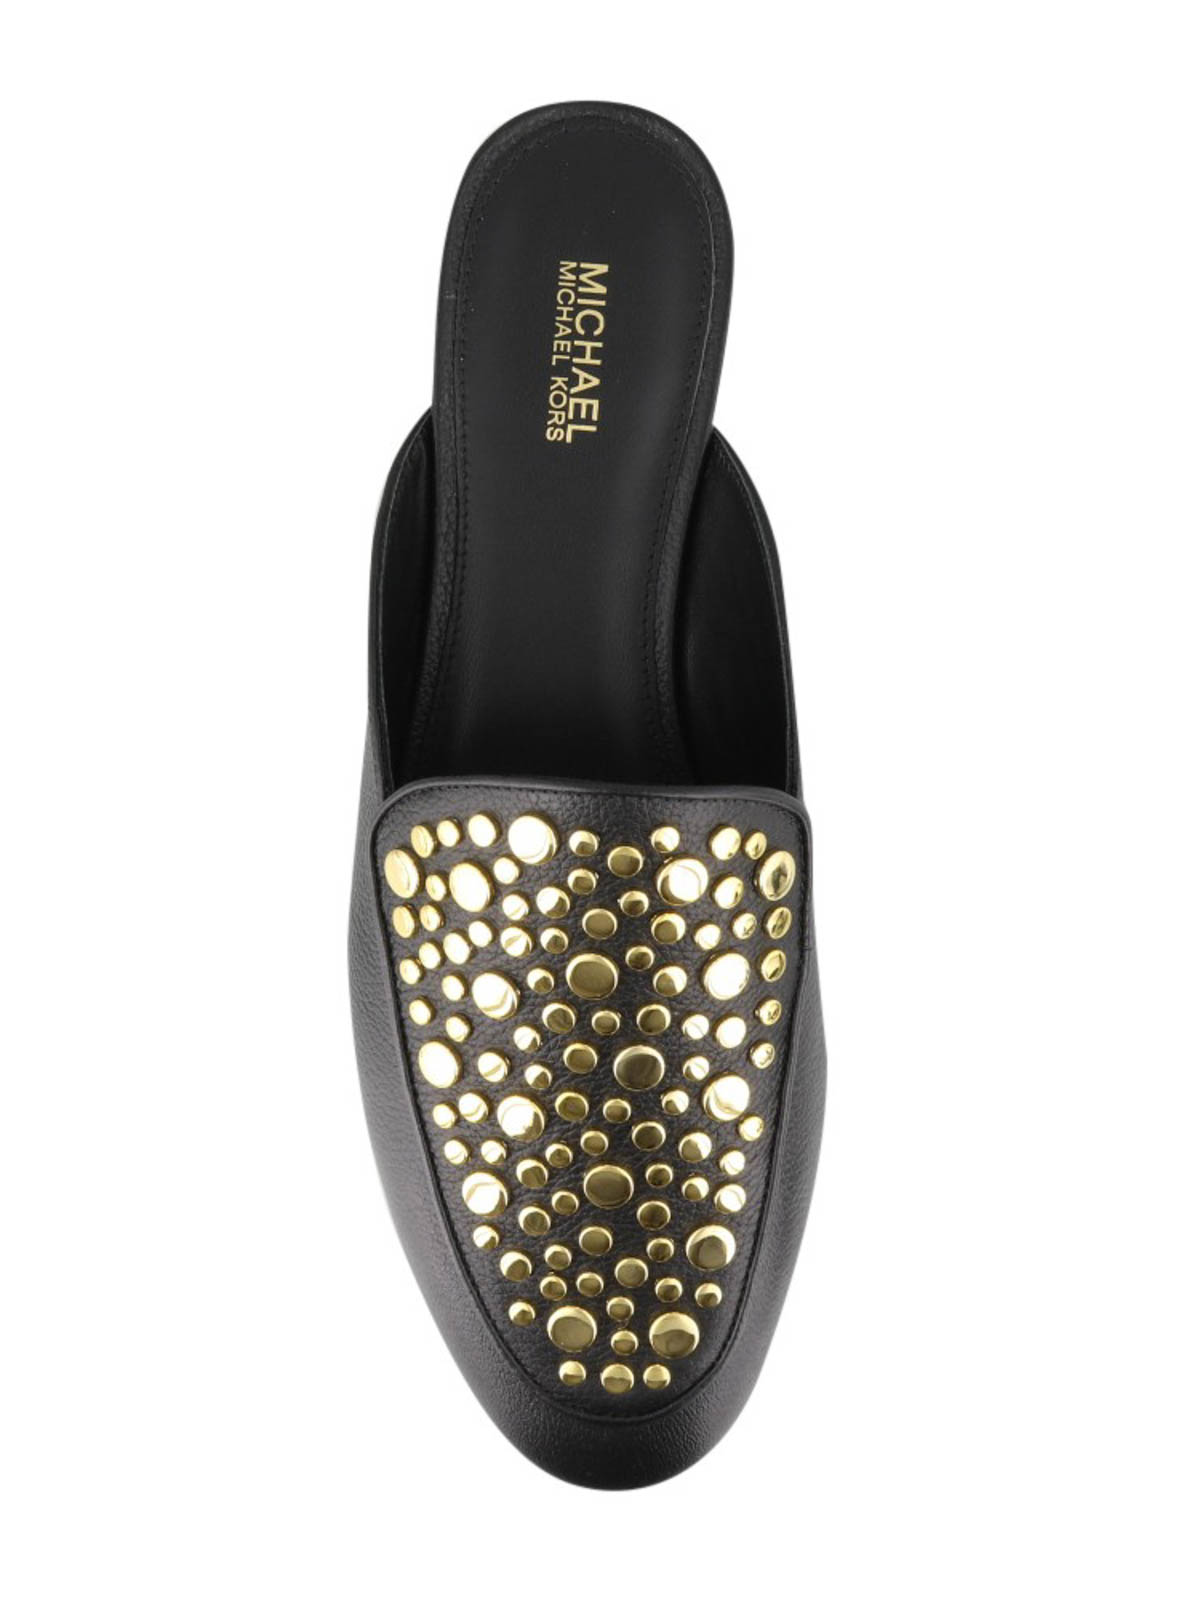 Mules shoes Michael Kors - Studs detailed leather mules 